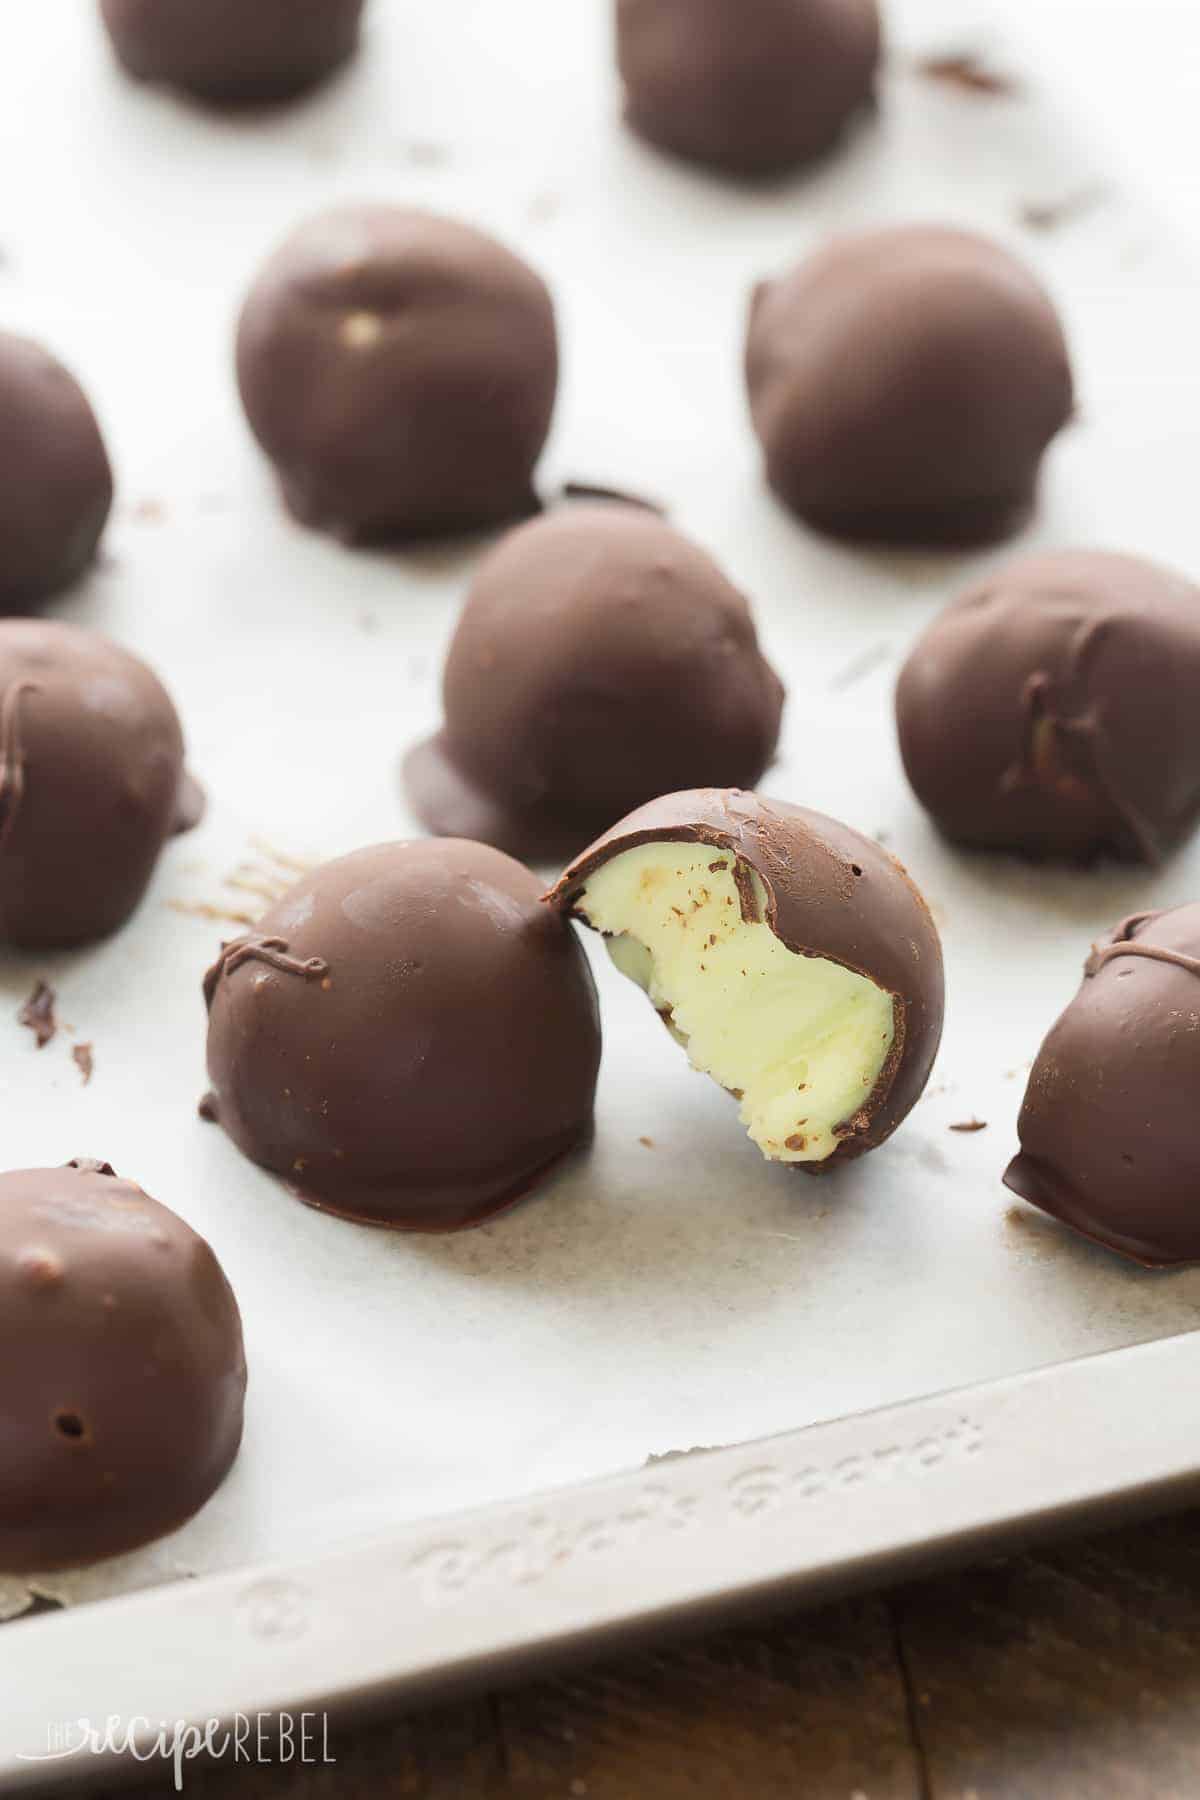 These Easy Mint Chocolate Truffles are an easy no bake Christmas dessert perfect for gift giving! They have a smooth creamy mint center and are covered in dark chocolate. Includes step by step recipe video. | Christmas candy | Christmas baking | chocolates | candies | easy truffles | easy Christmas candy